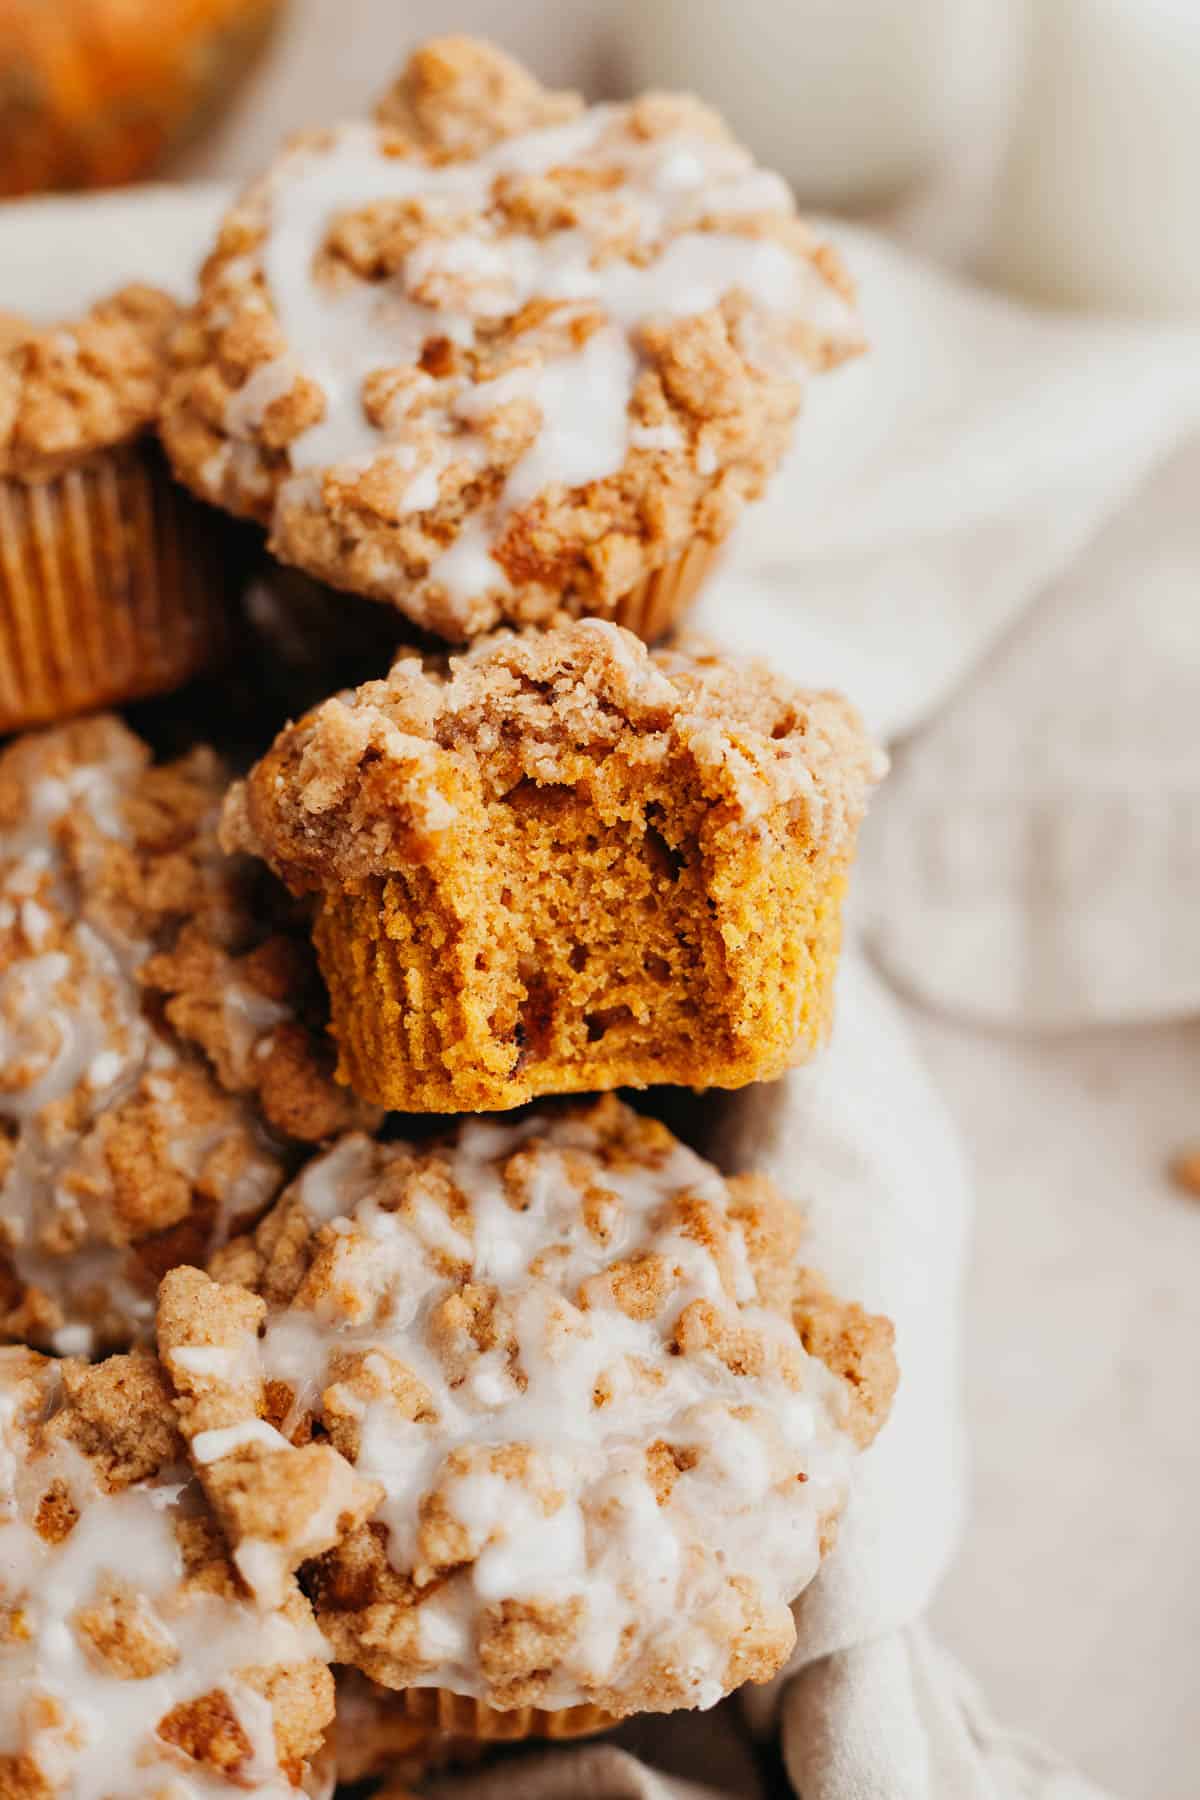 A close up of a pumpkin muffin with a streusel topping, a bite has been taken out of it.